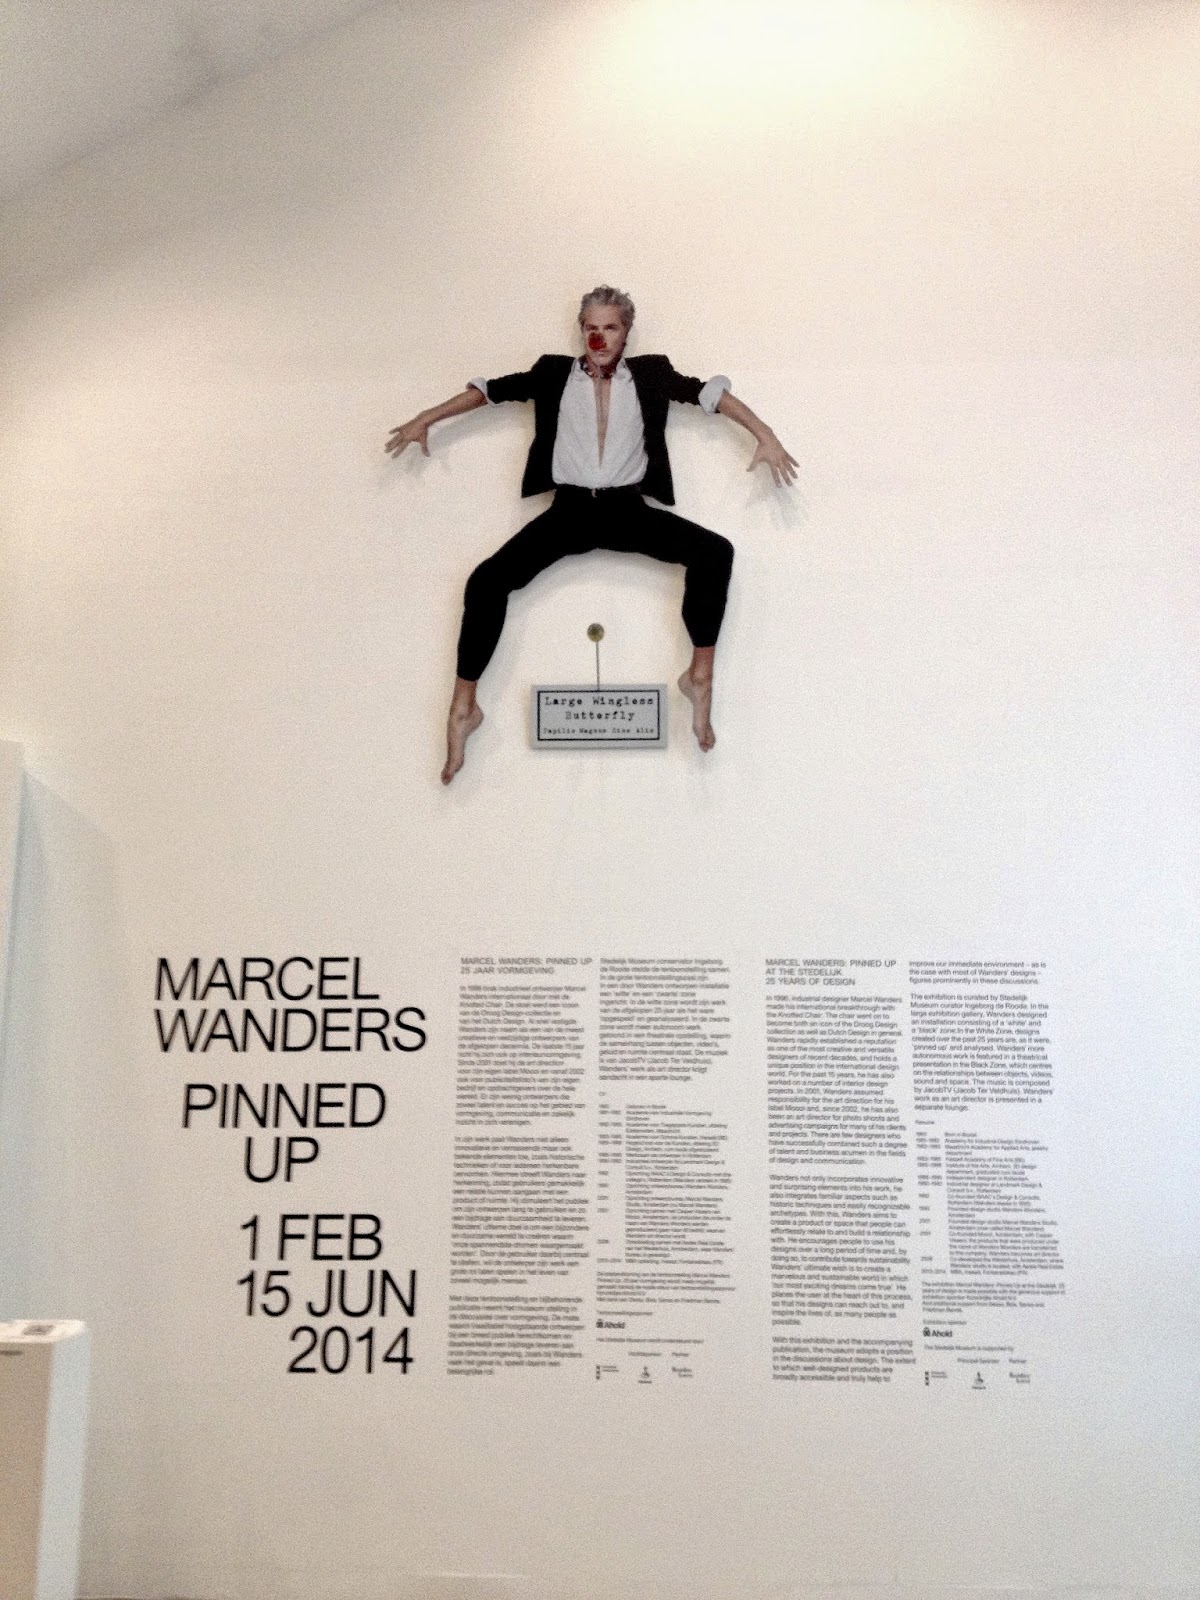 Marcel Wanders: Pinned Up at the Stedelijk